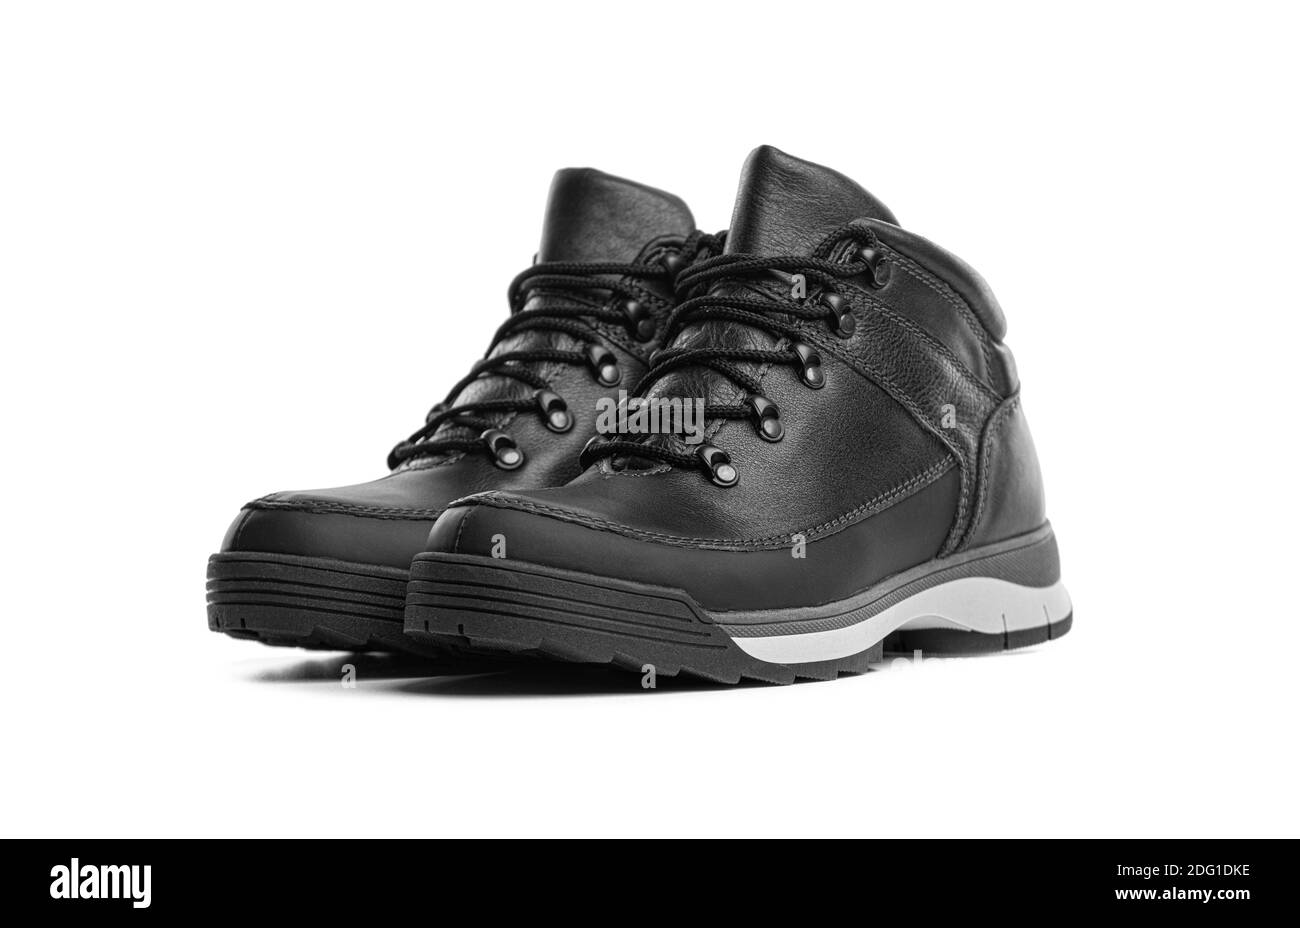 Walking boots isolated Black and White Stock Photos & Images - Alamy